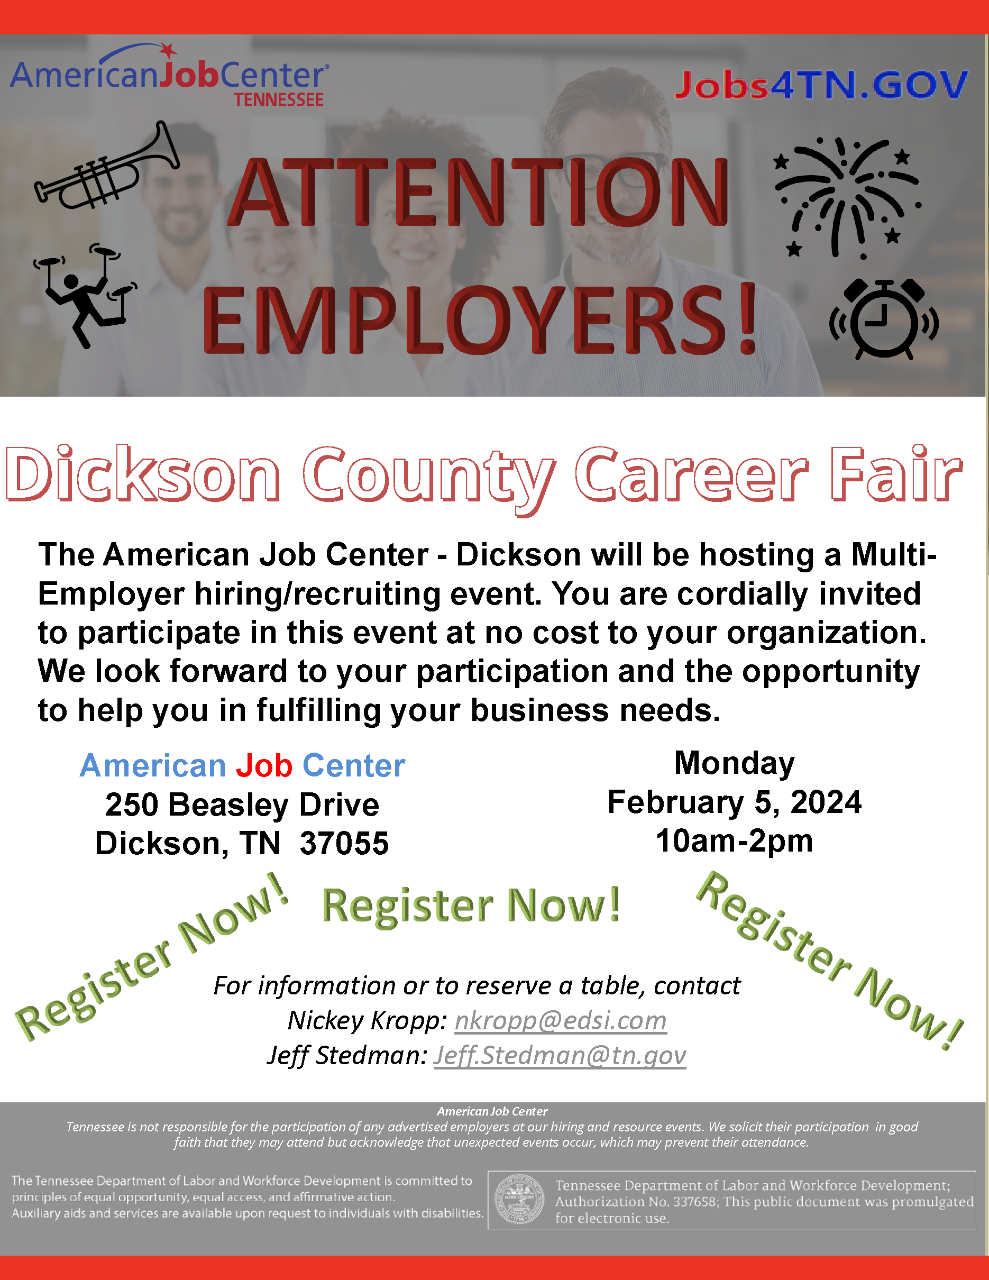 Attention Employers - Career Fair at Dickson AJC February 5, 2024